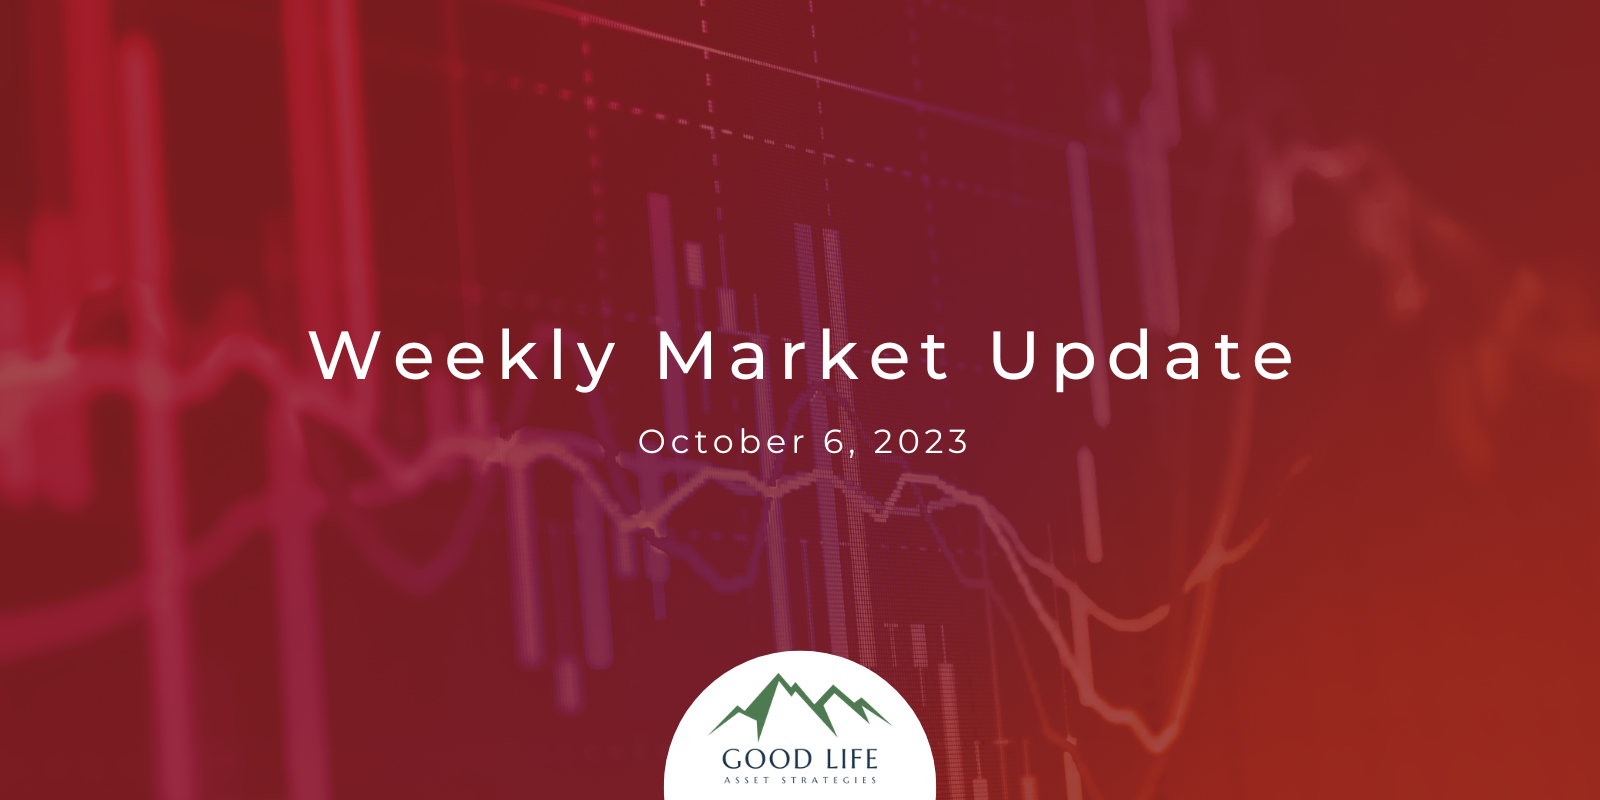 Weekly Market Update for October 6, 2023, from DeWayne Hall: Why is the rally in stock market trading happening?